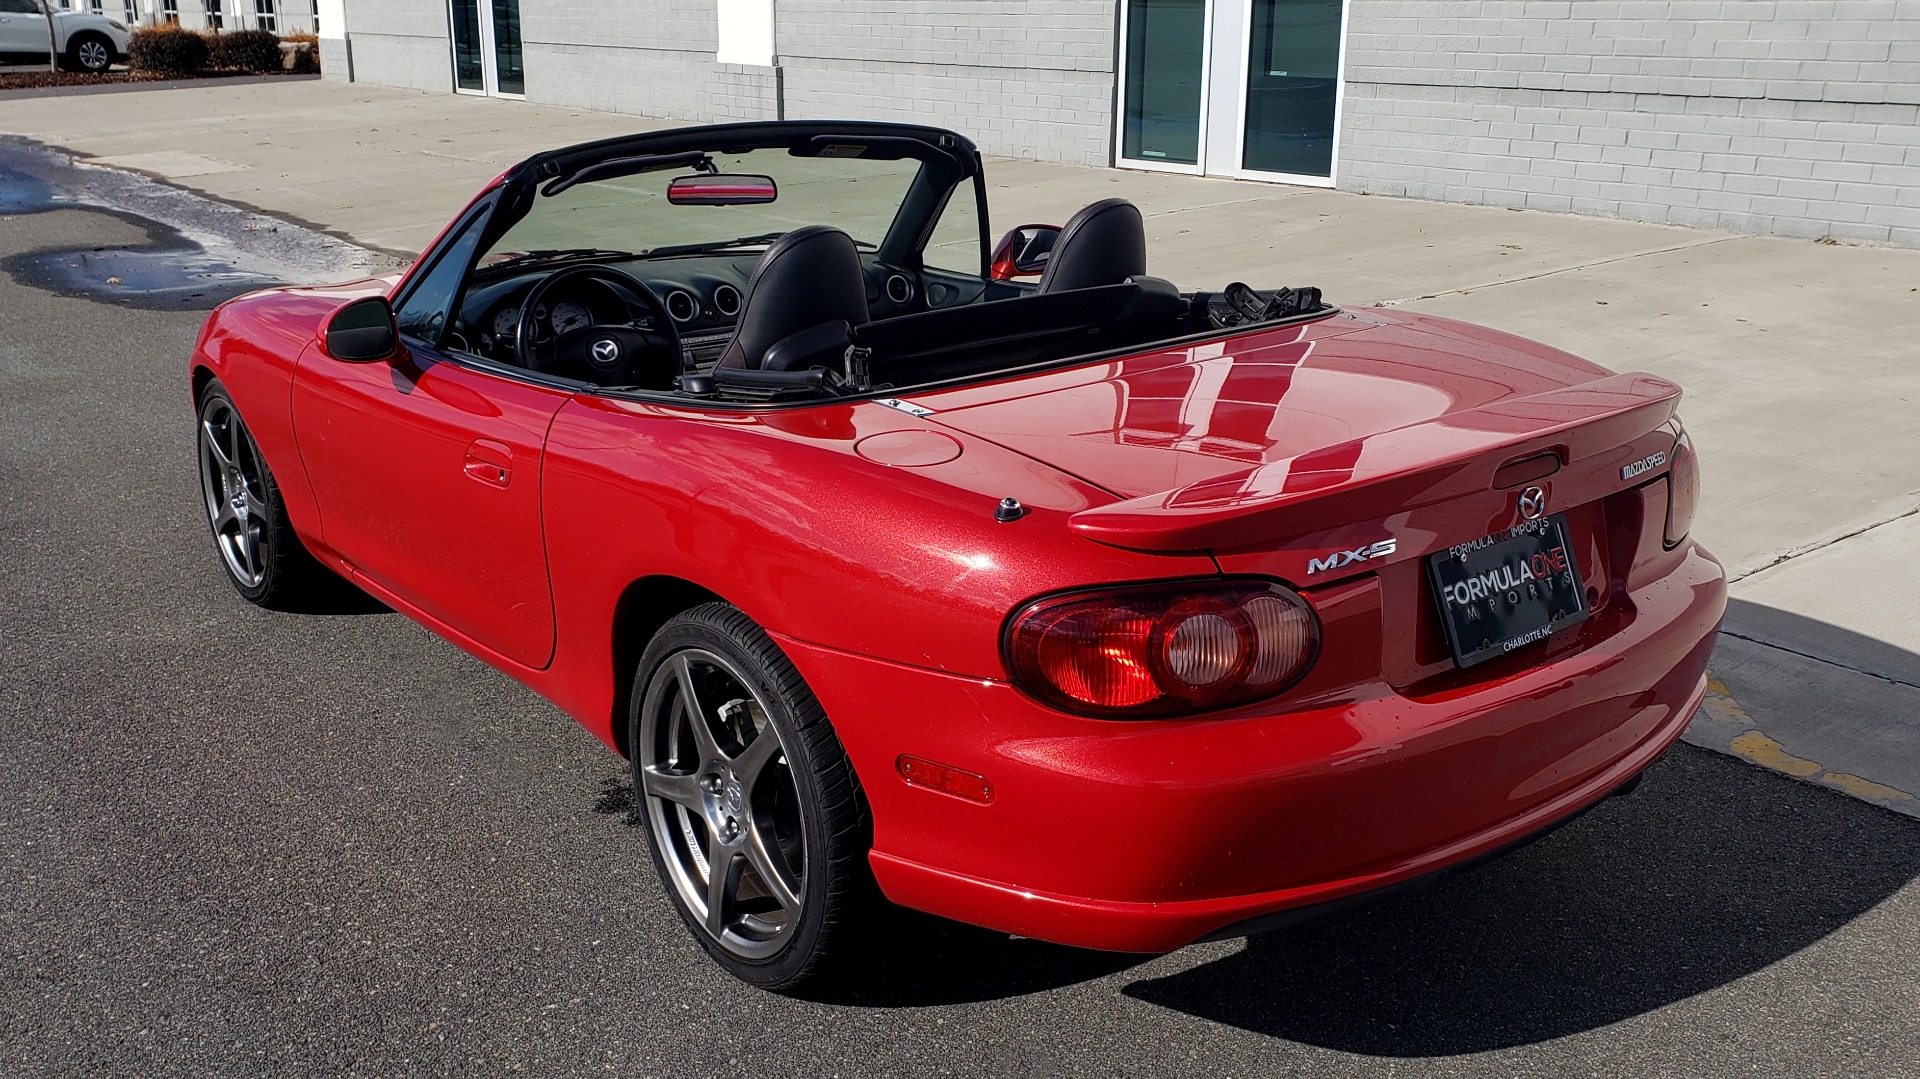 Used 2004 Mazda MX-5 MIATA 2DR CONVERTIBLE MAZDASPEED / GRAND TOURING PKG for sale Sold at Formula Imports in Charlotte NC 28227 6